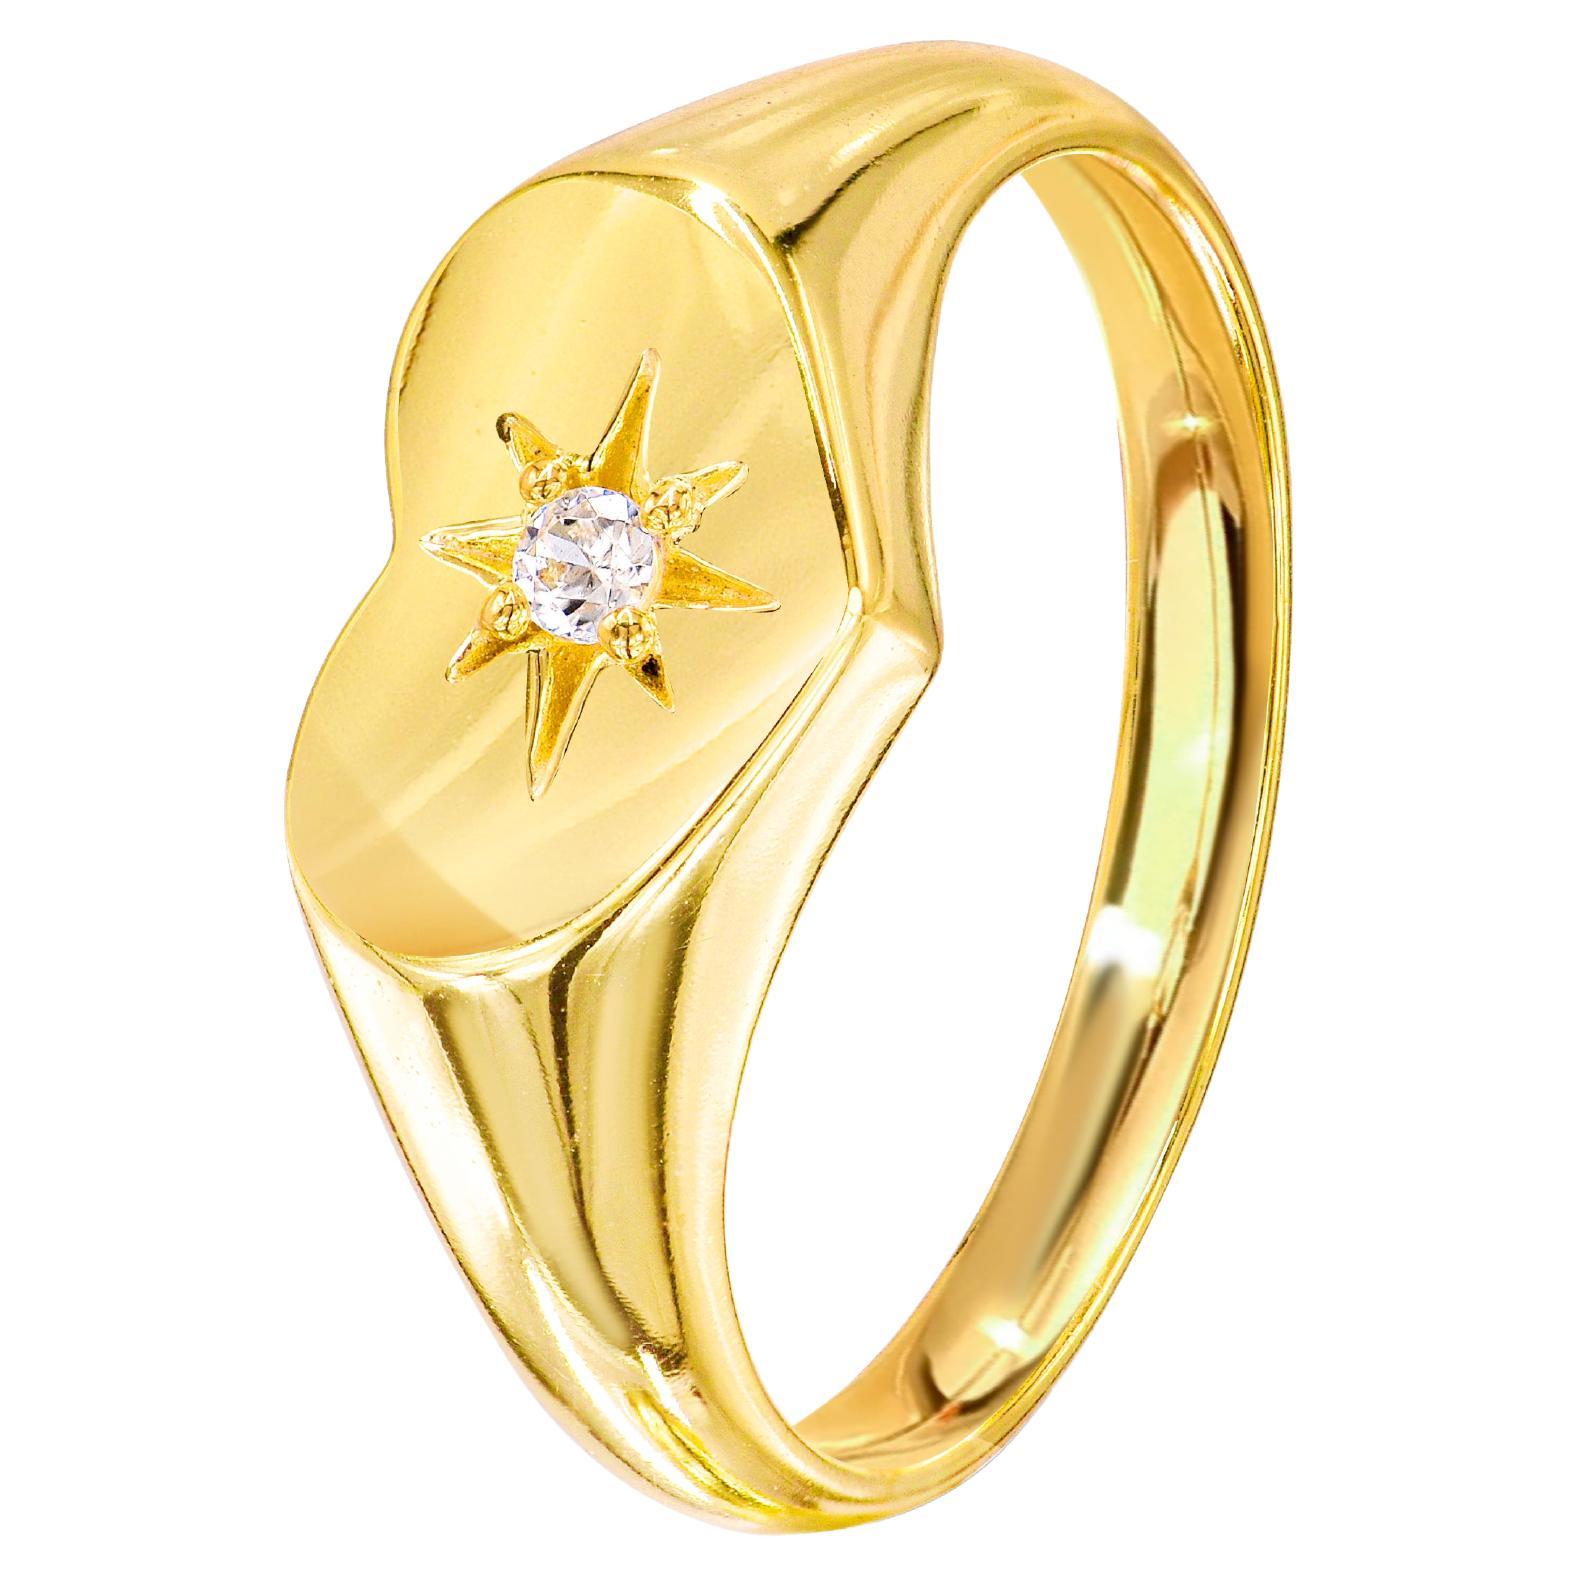 For Sale:  18K Genuine Gold Filled Heart Shape Signet Ring with 0.03 Carat Natural Diamond